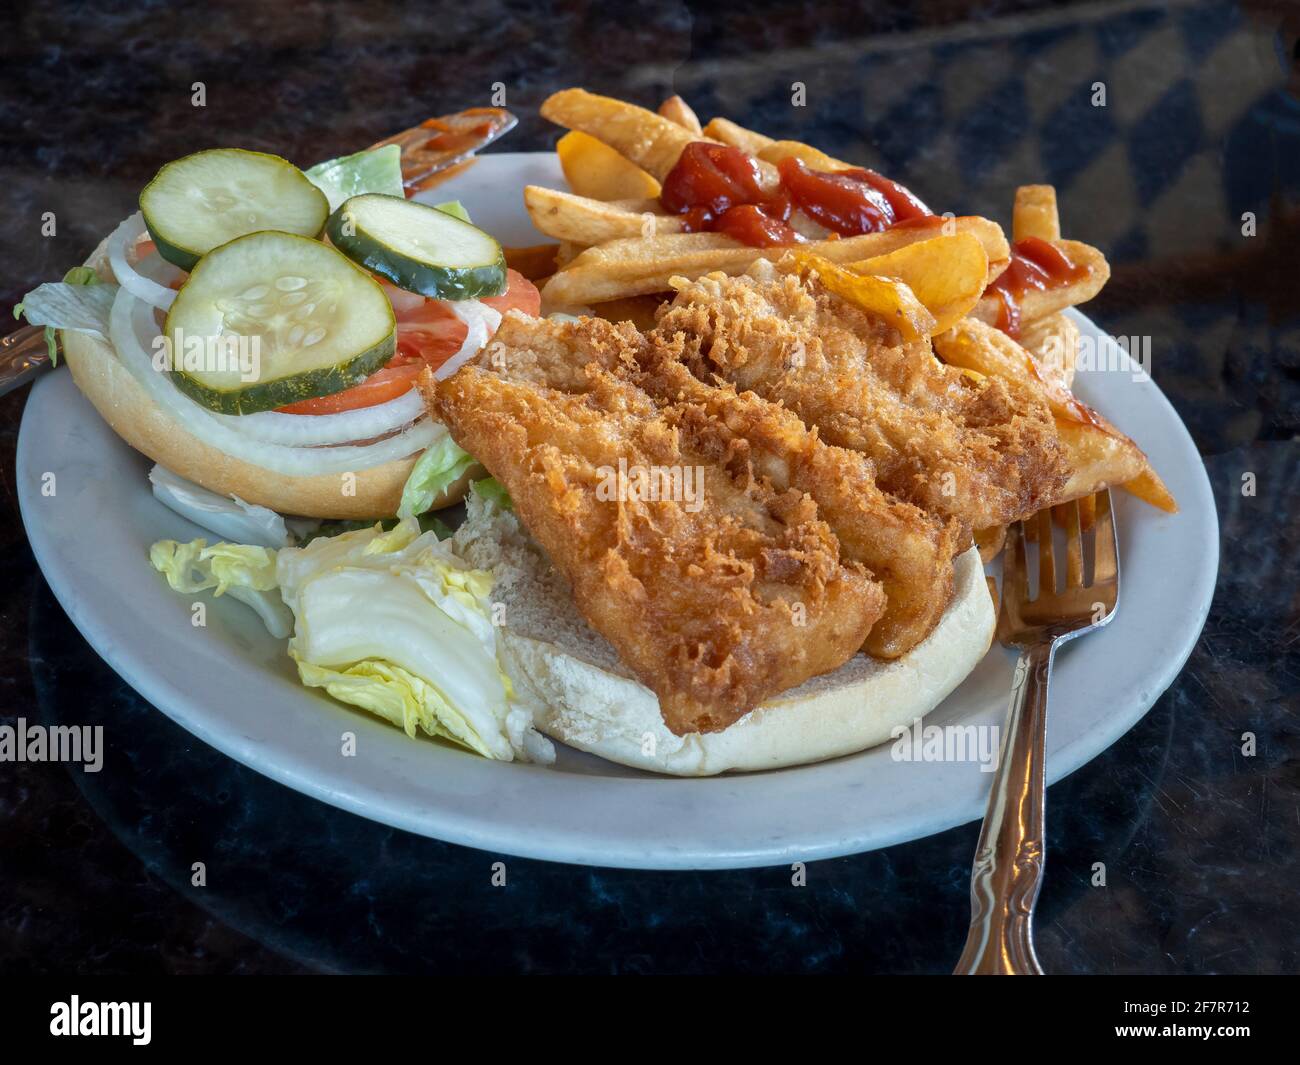 Lunch of Fried fish sandwich with french fries on light blue plate Stock Photo